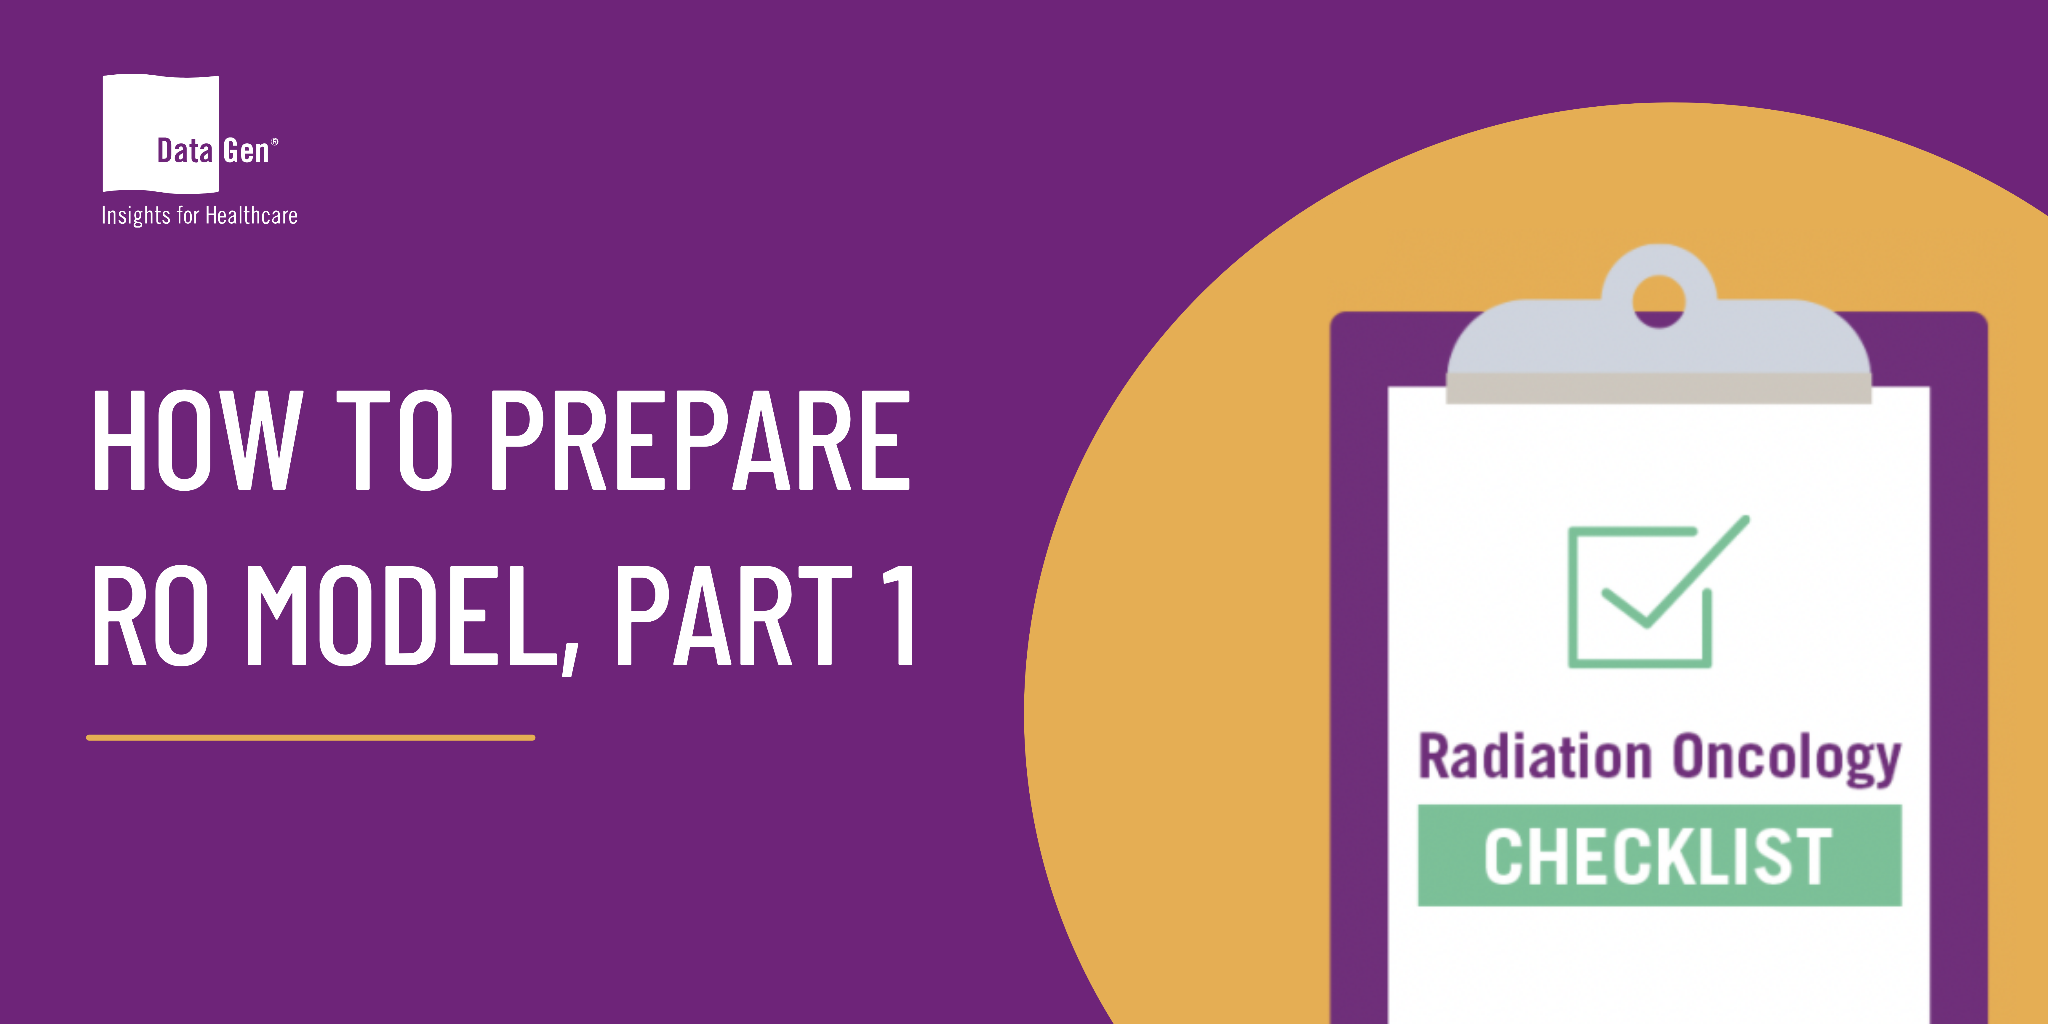 How to prepare Radiation Oncology Model, Part 1